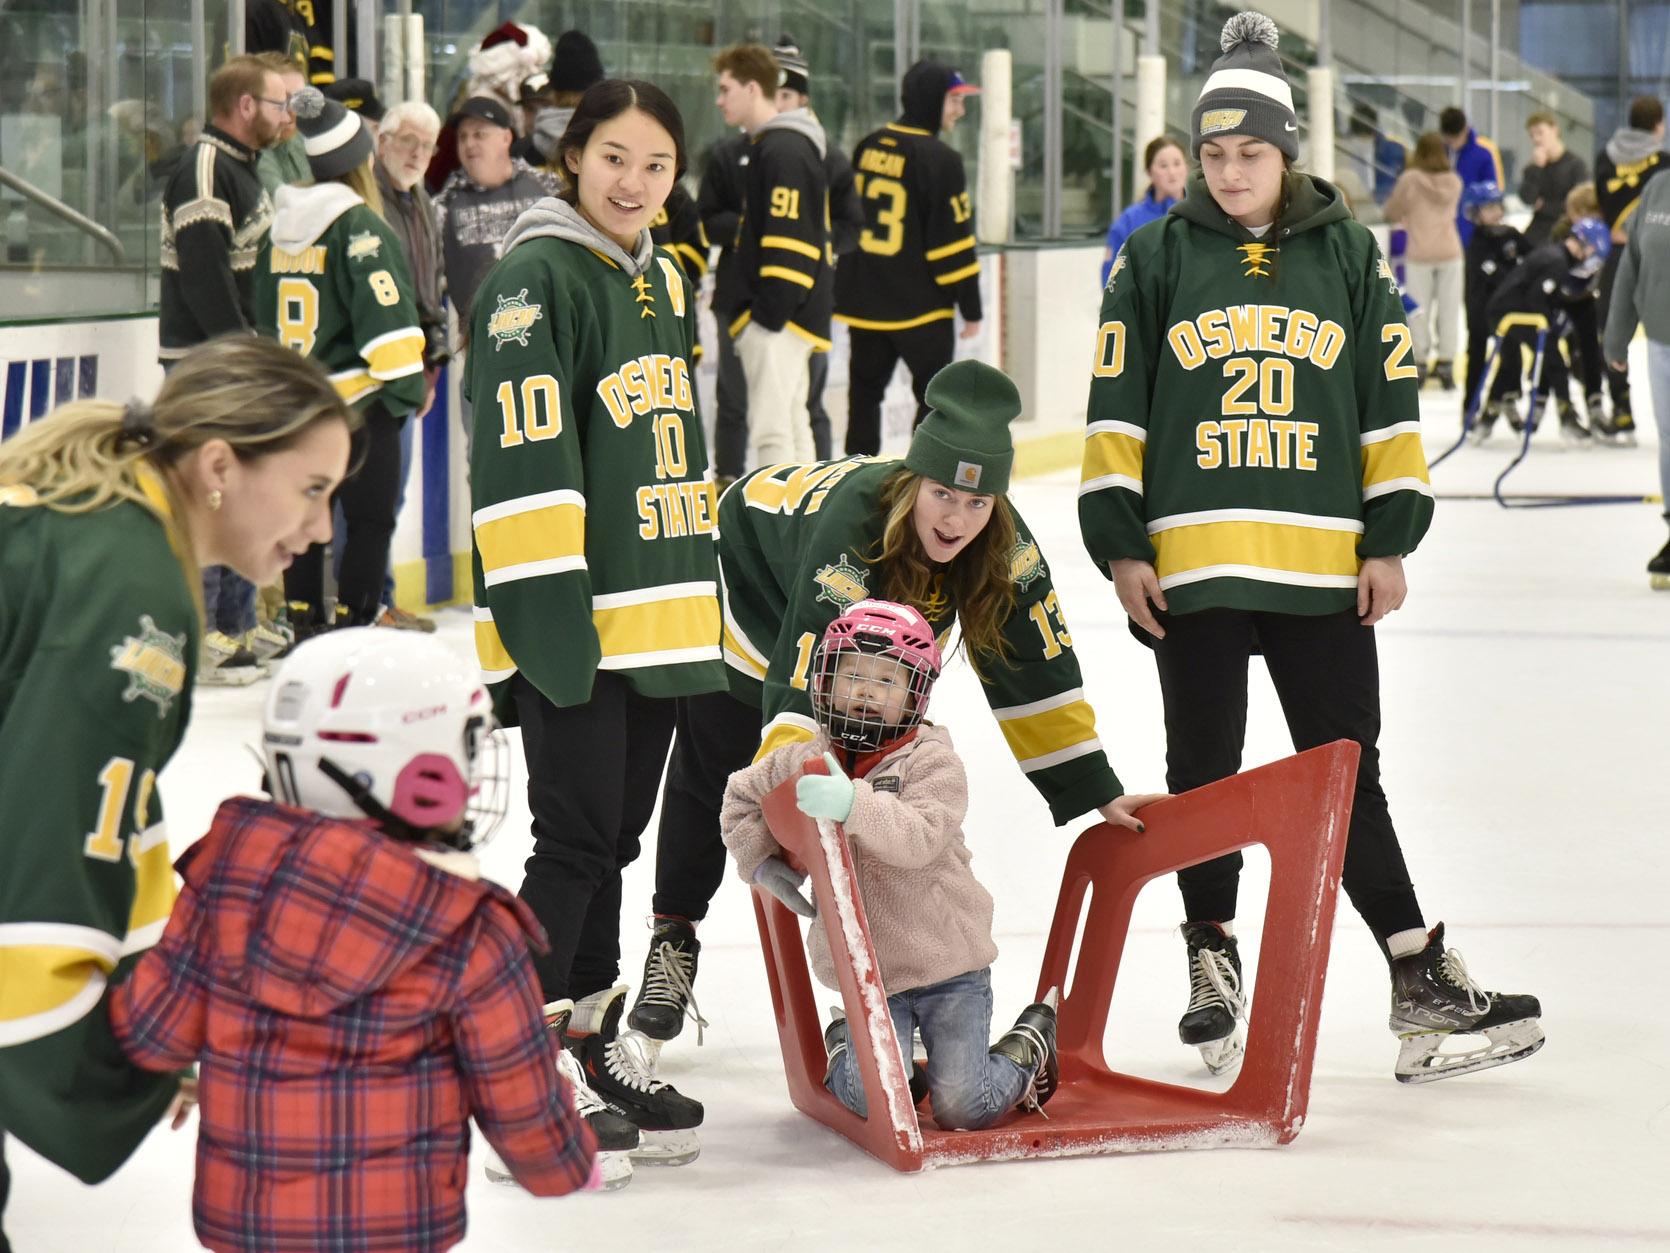 Laker women's hockey players have fun with kids during holiday skate